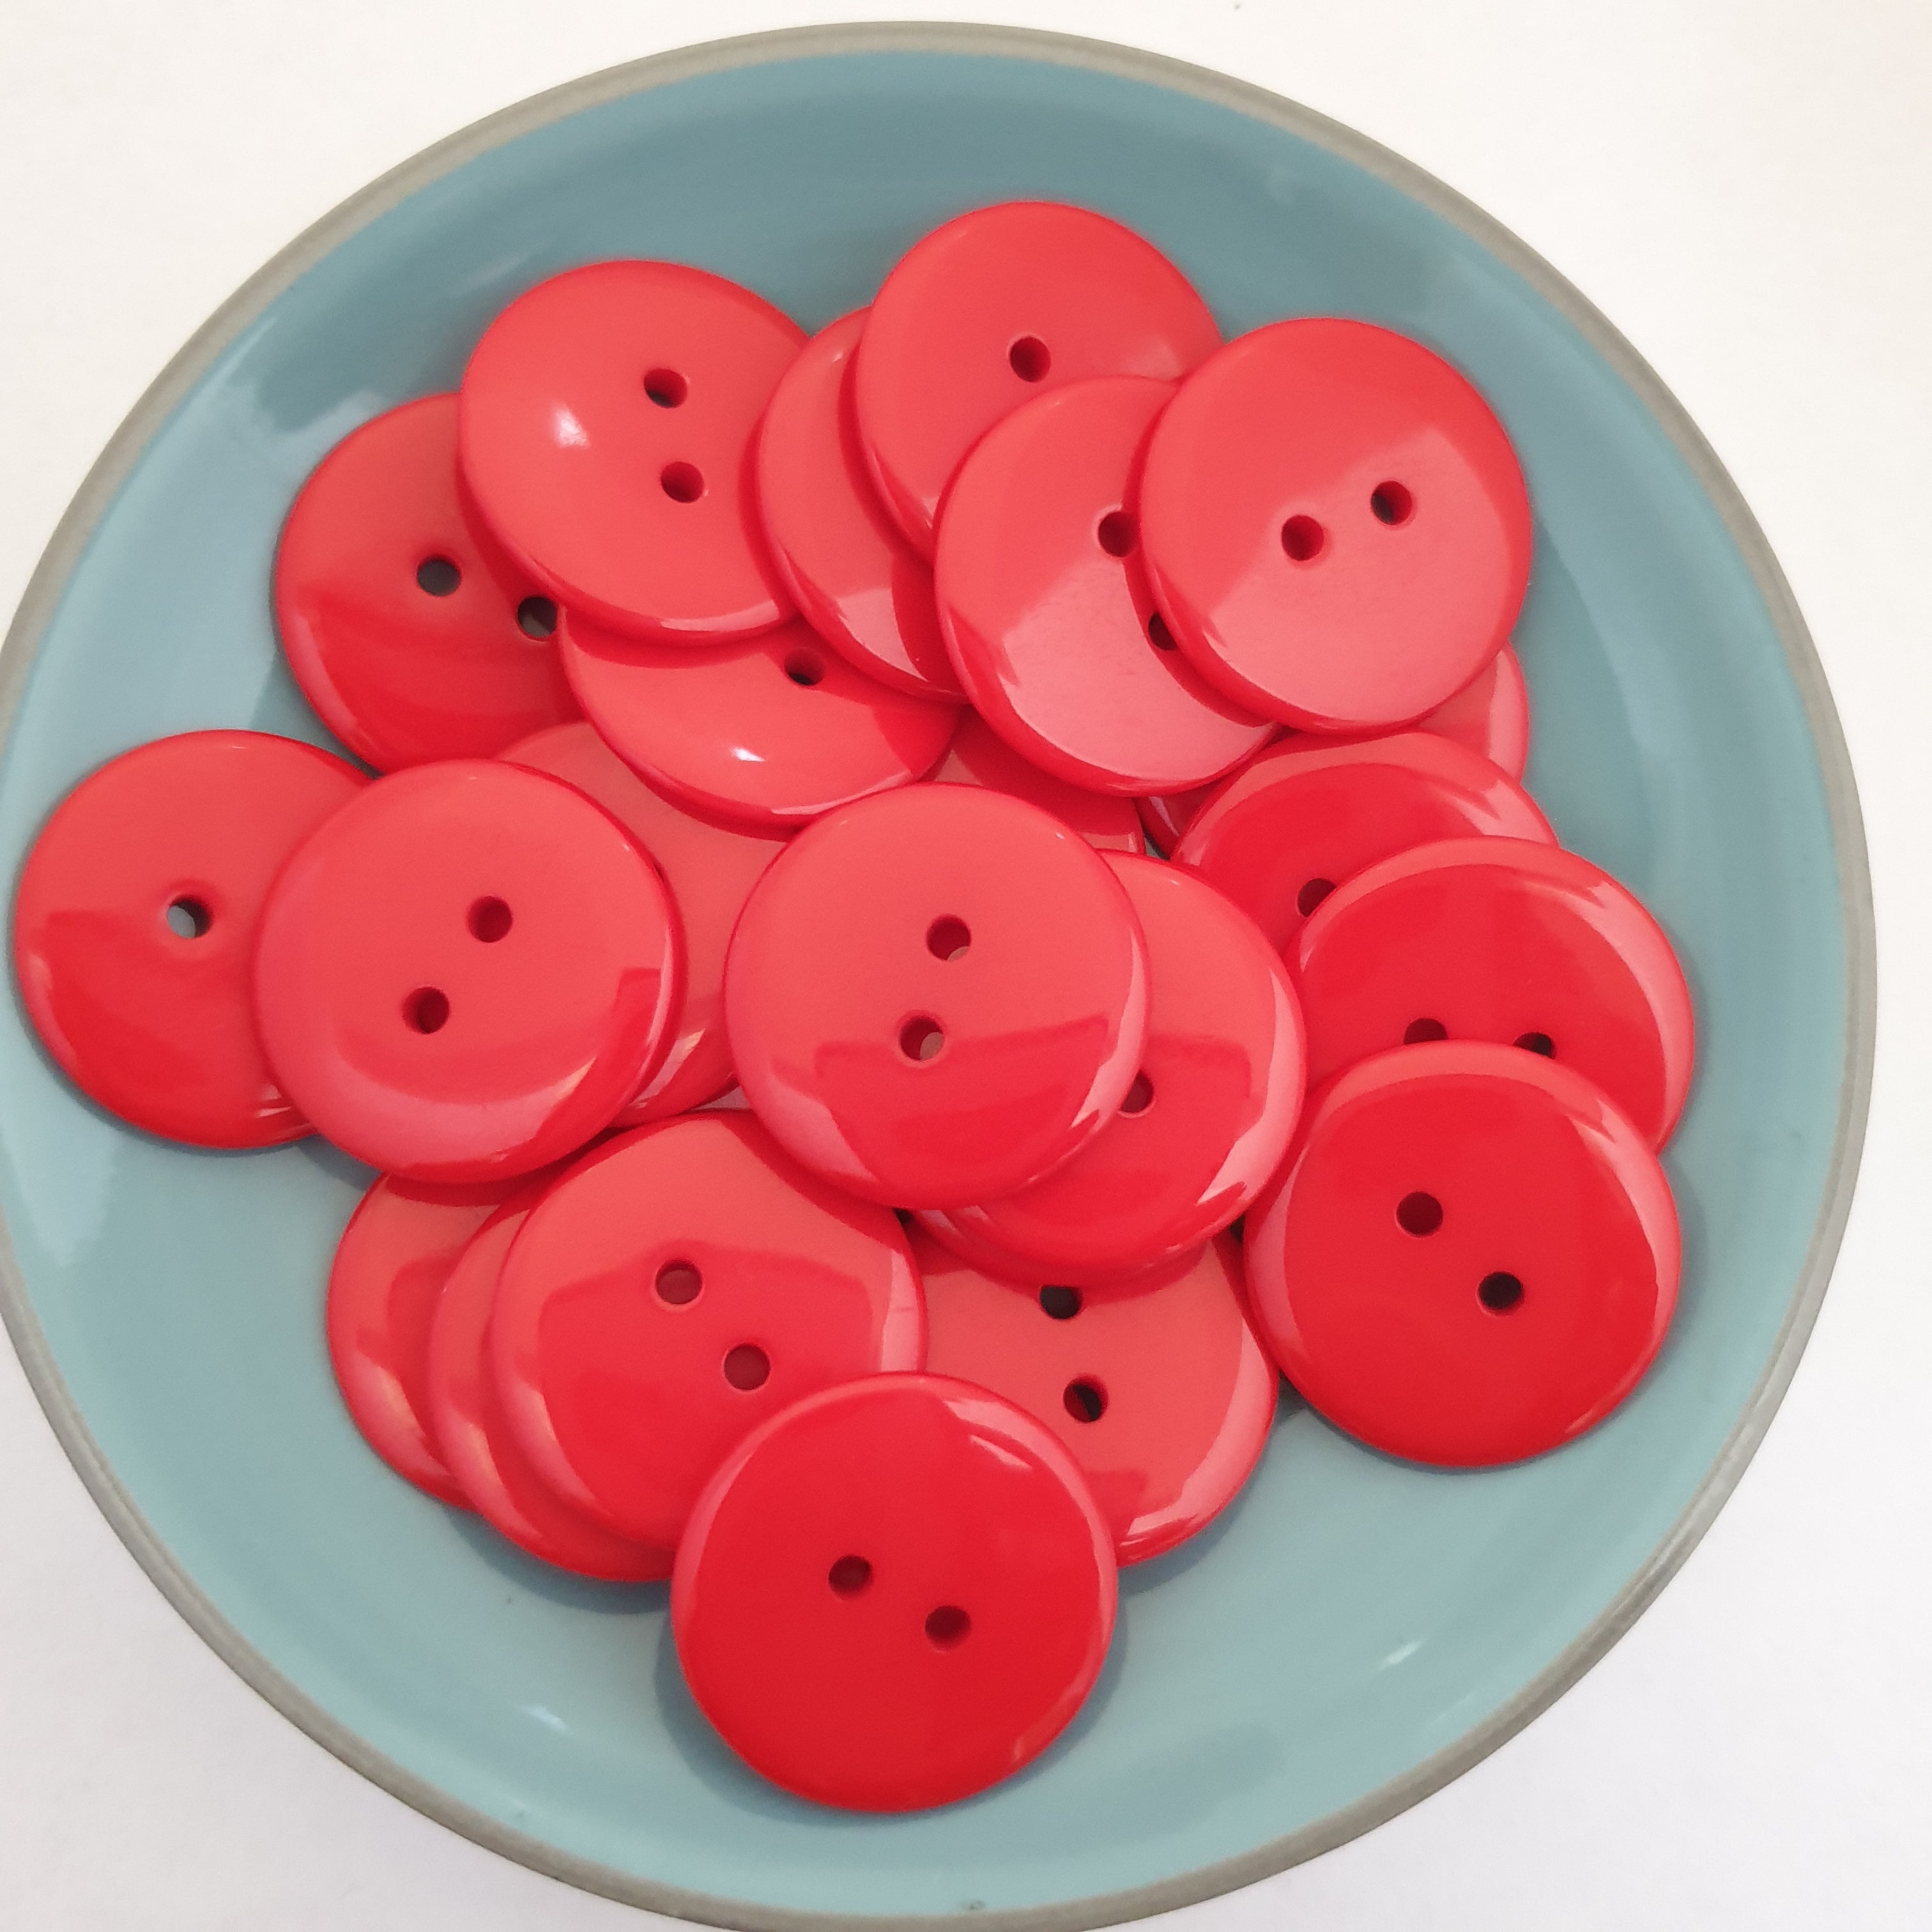 MajorCrafts 36pcs 23mm Red 2 Holes Round Large Resin Sewing Buttons